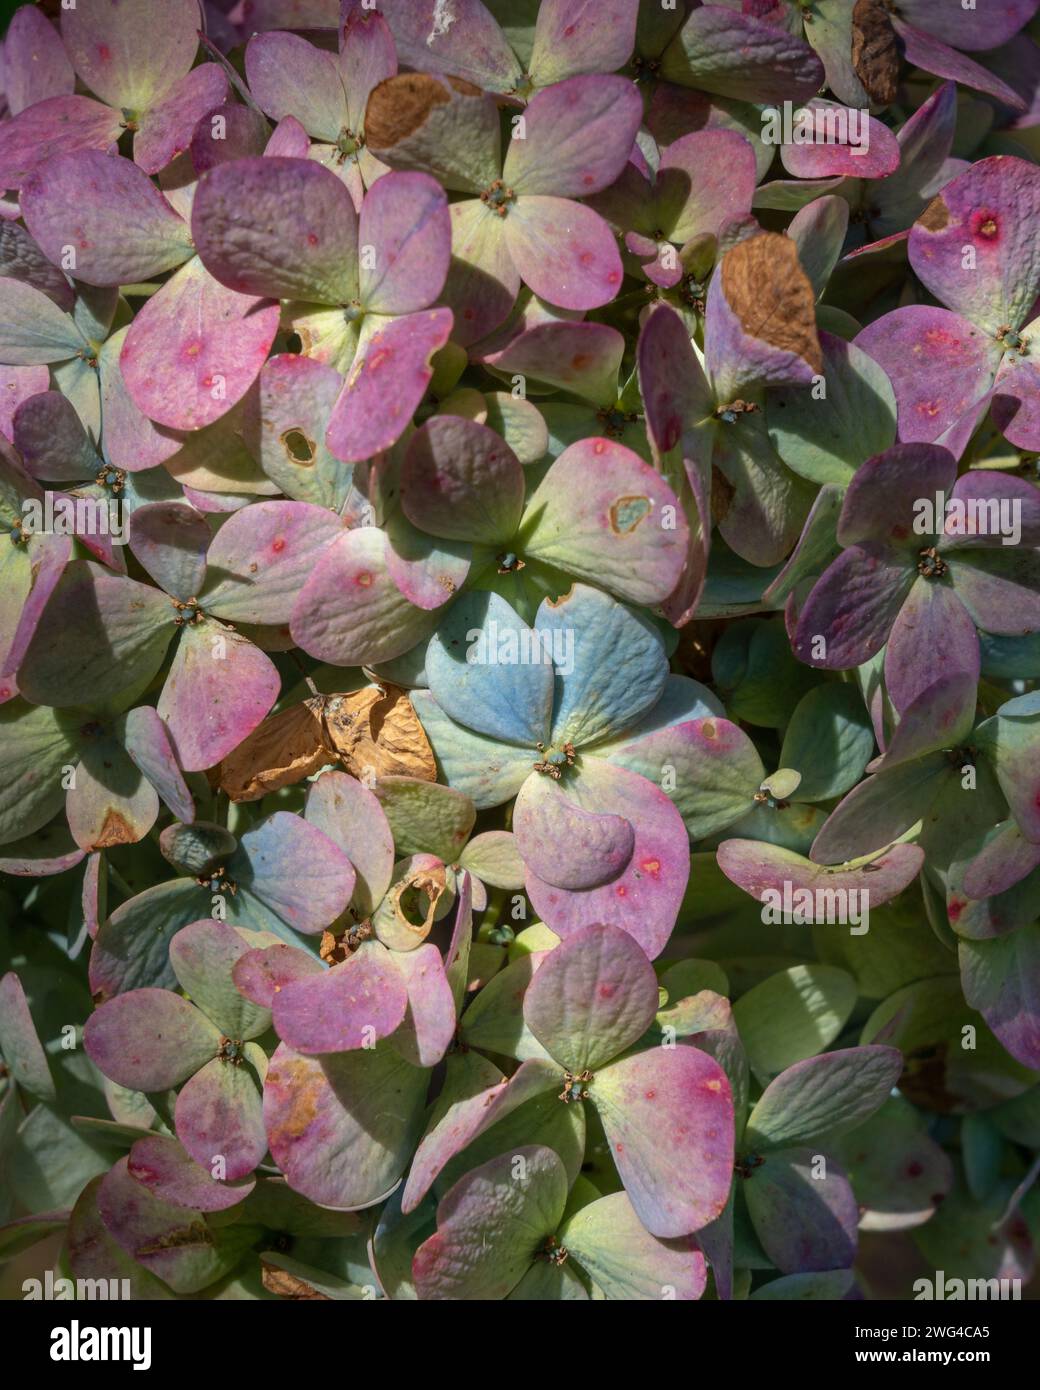 Detail closeup view of beautiful wilting hydrangea macrophylla blue and pink flowers in natural outdoor setting Stock Photo